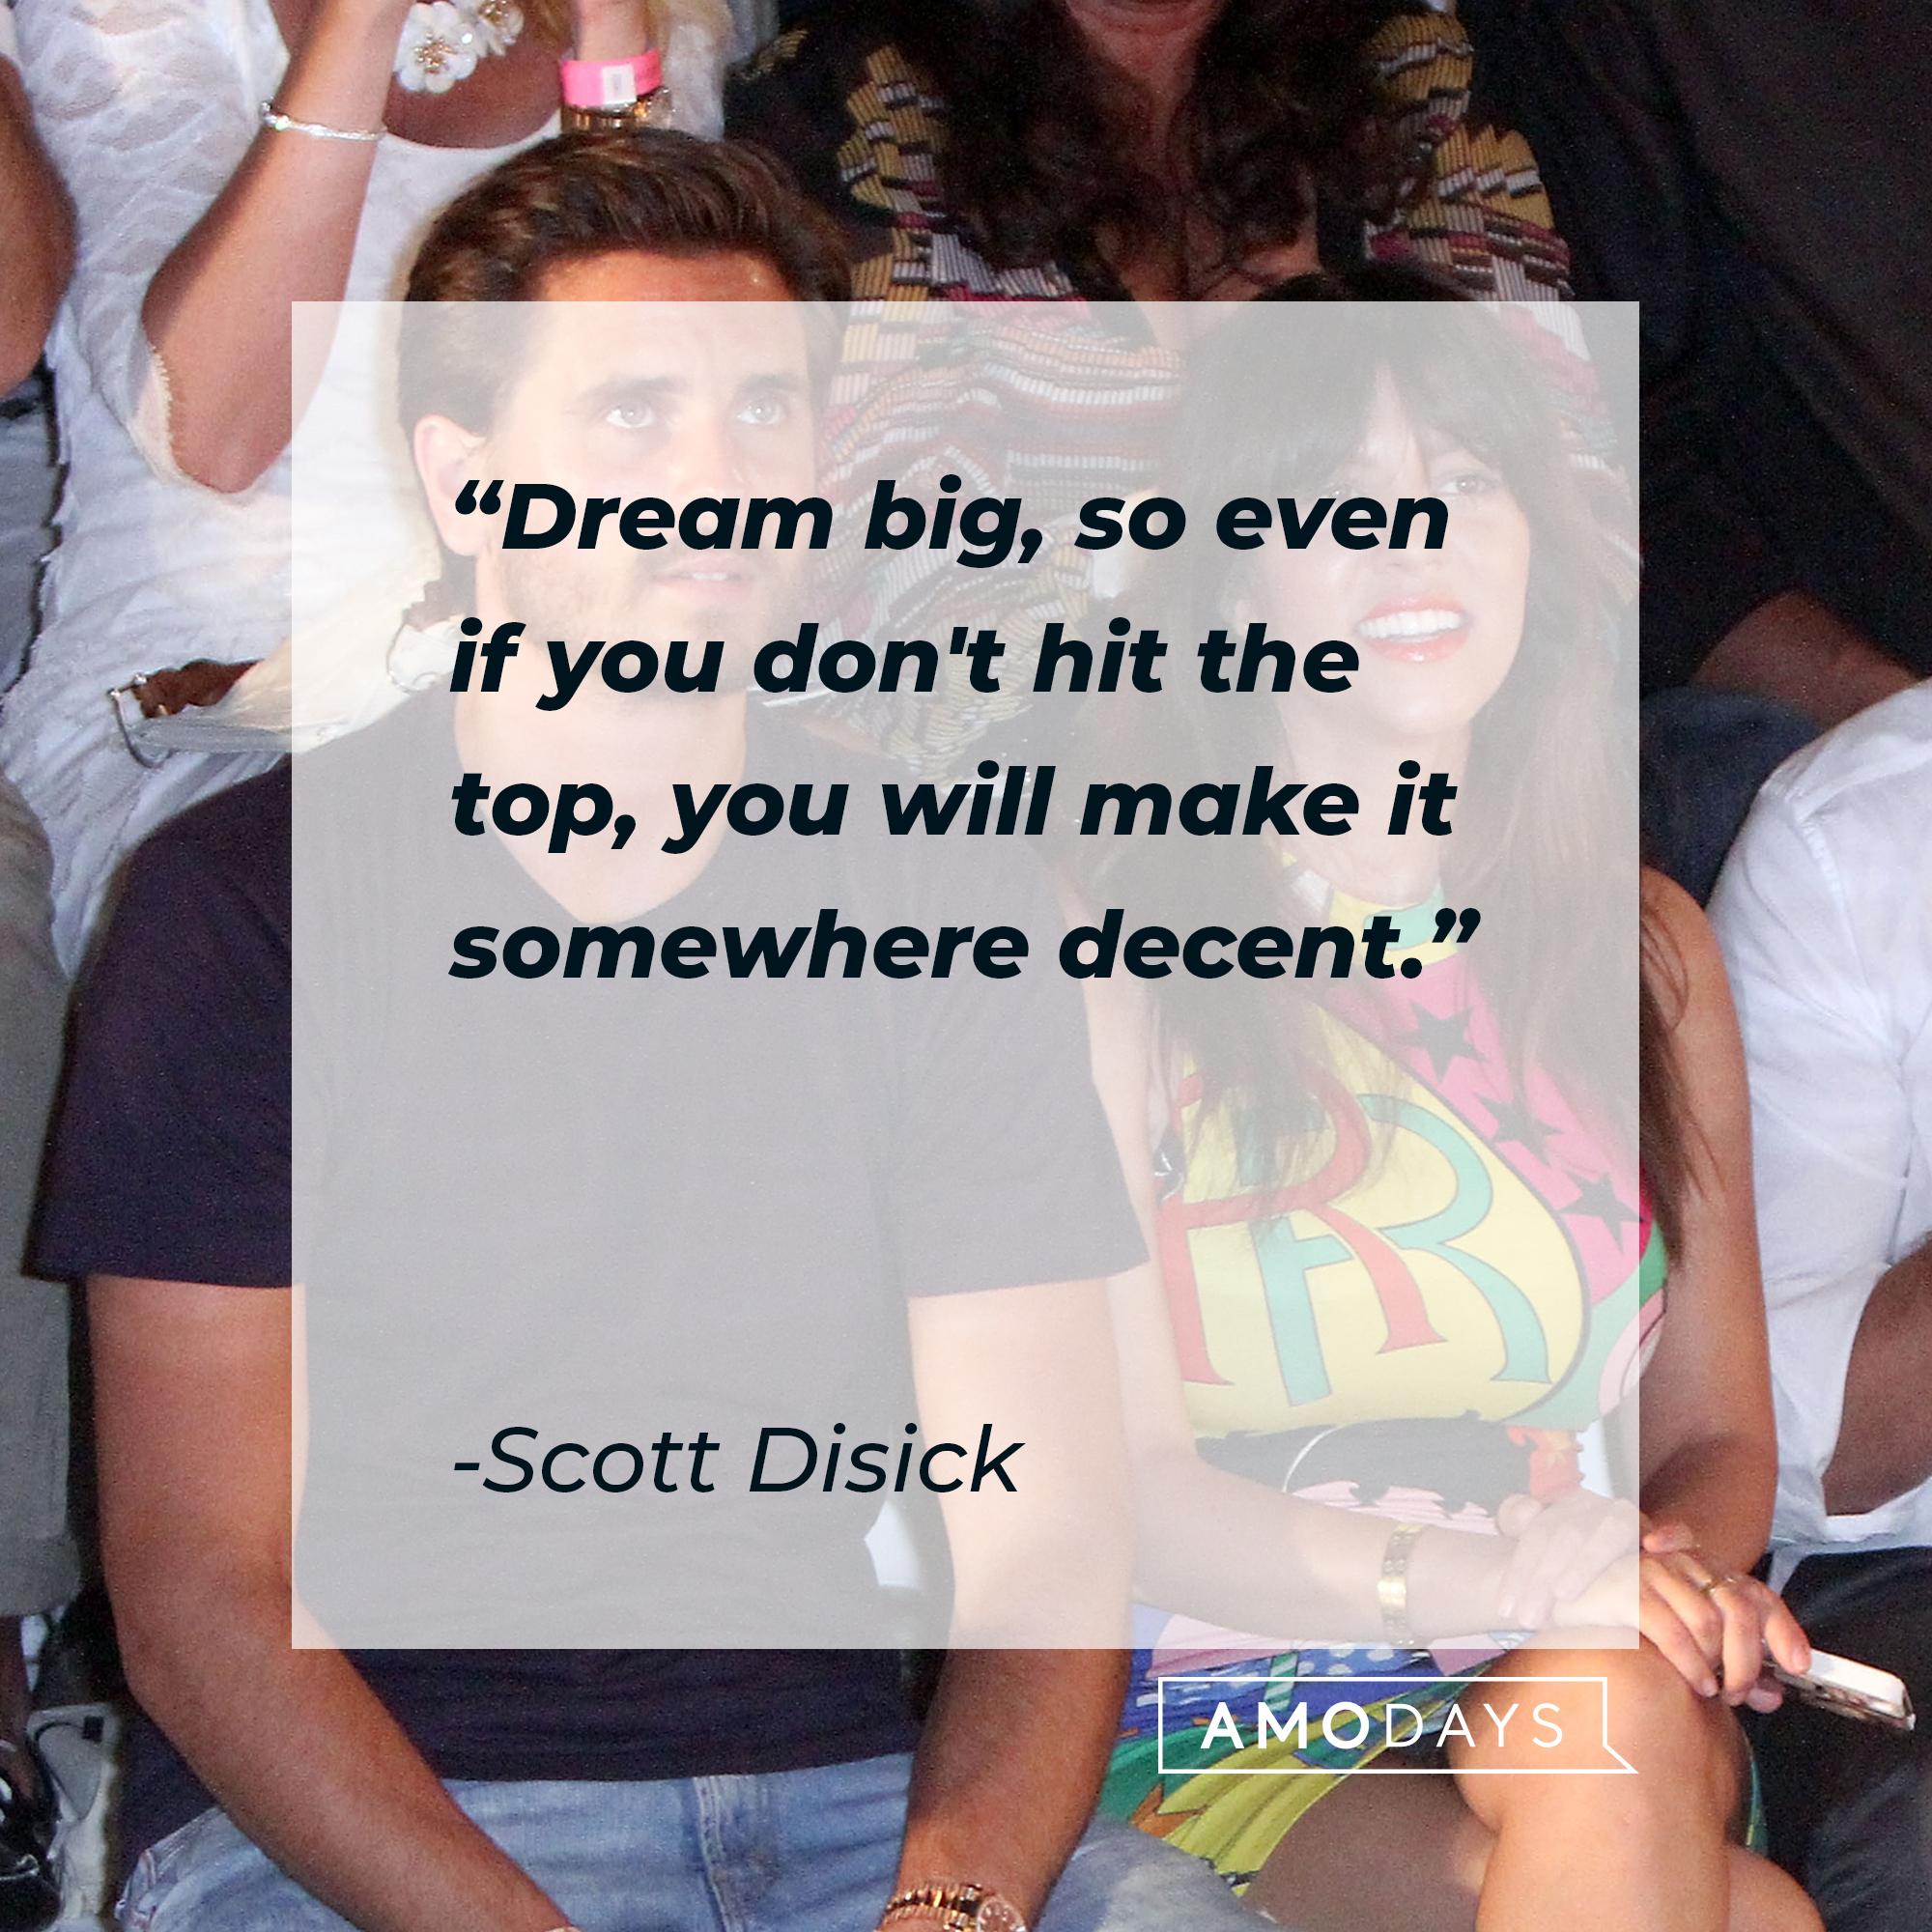 Scott Disick quote: "Dream big, so even if you don't hit the top, you will make it somewhere decent." | Source: Getty Images